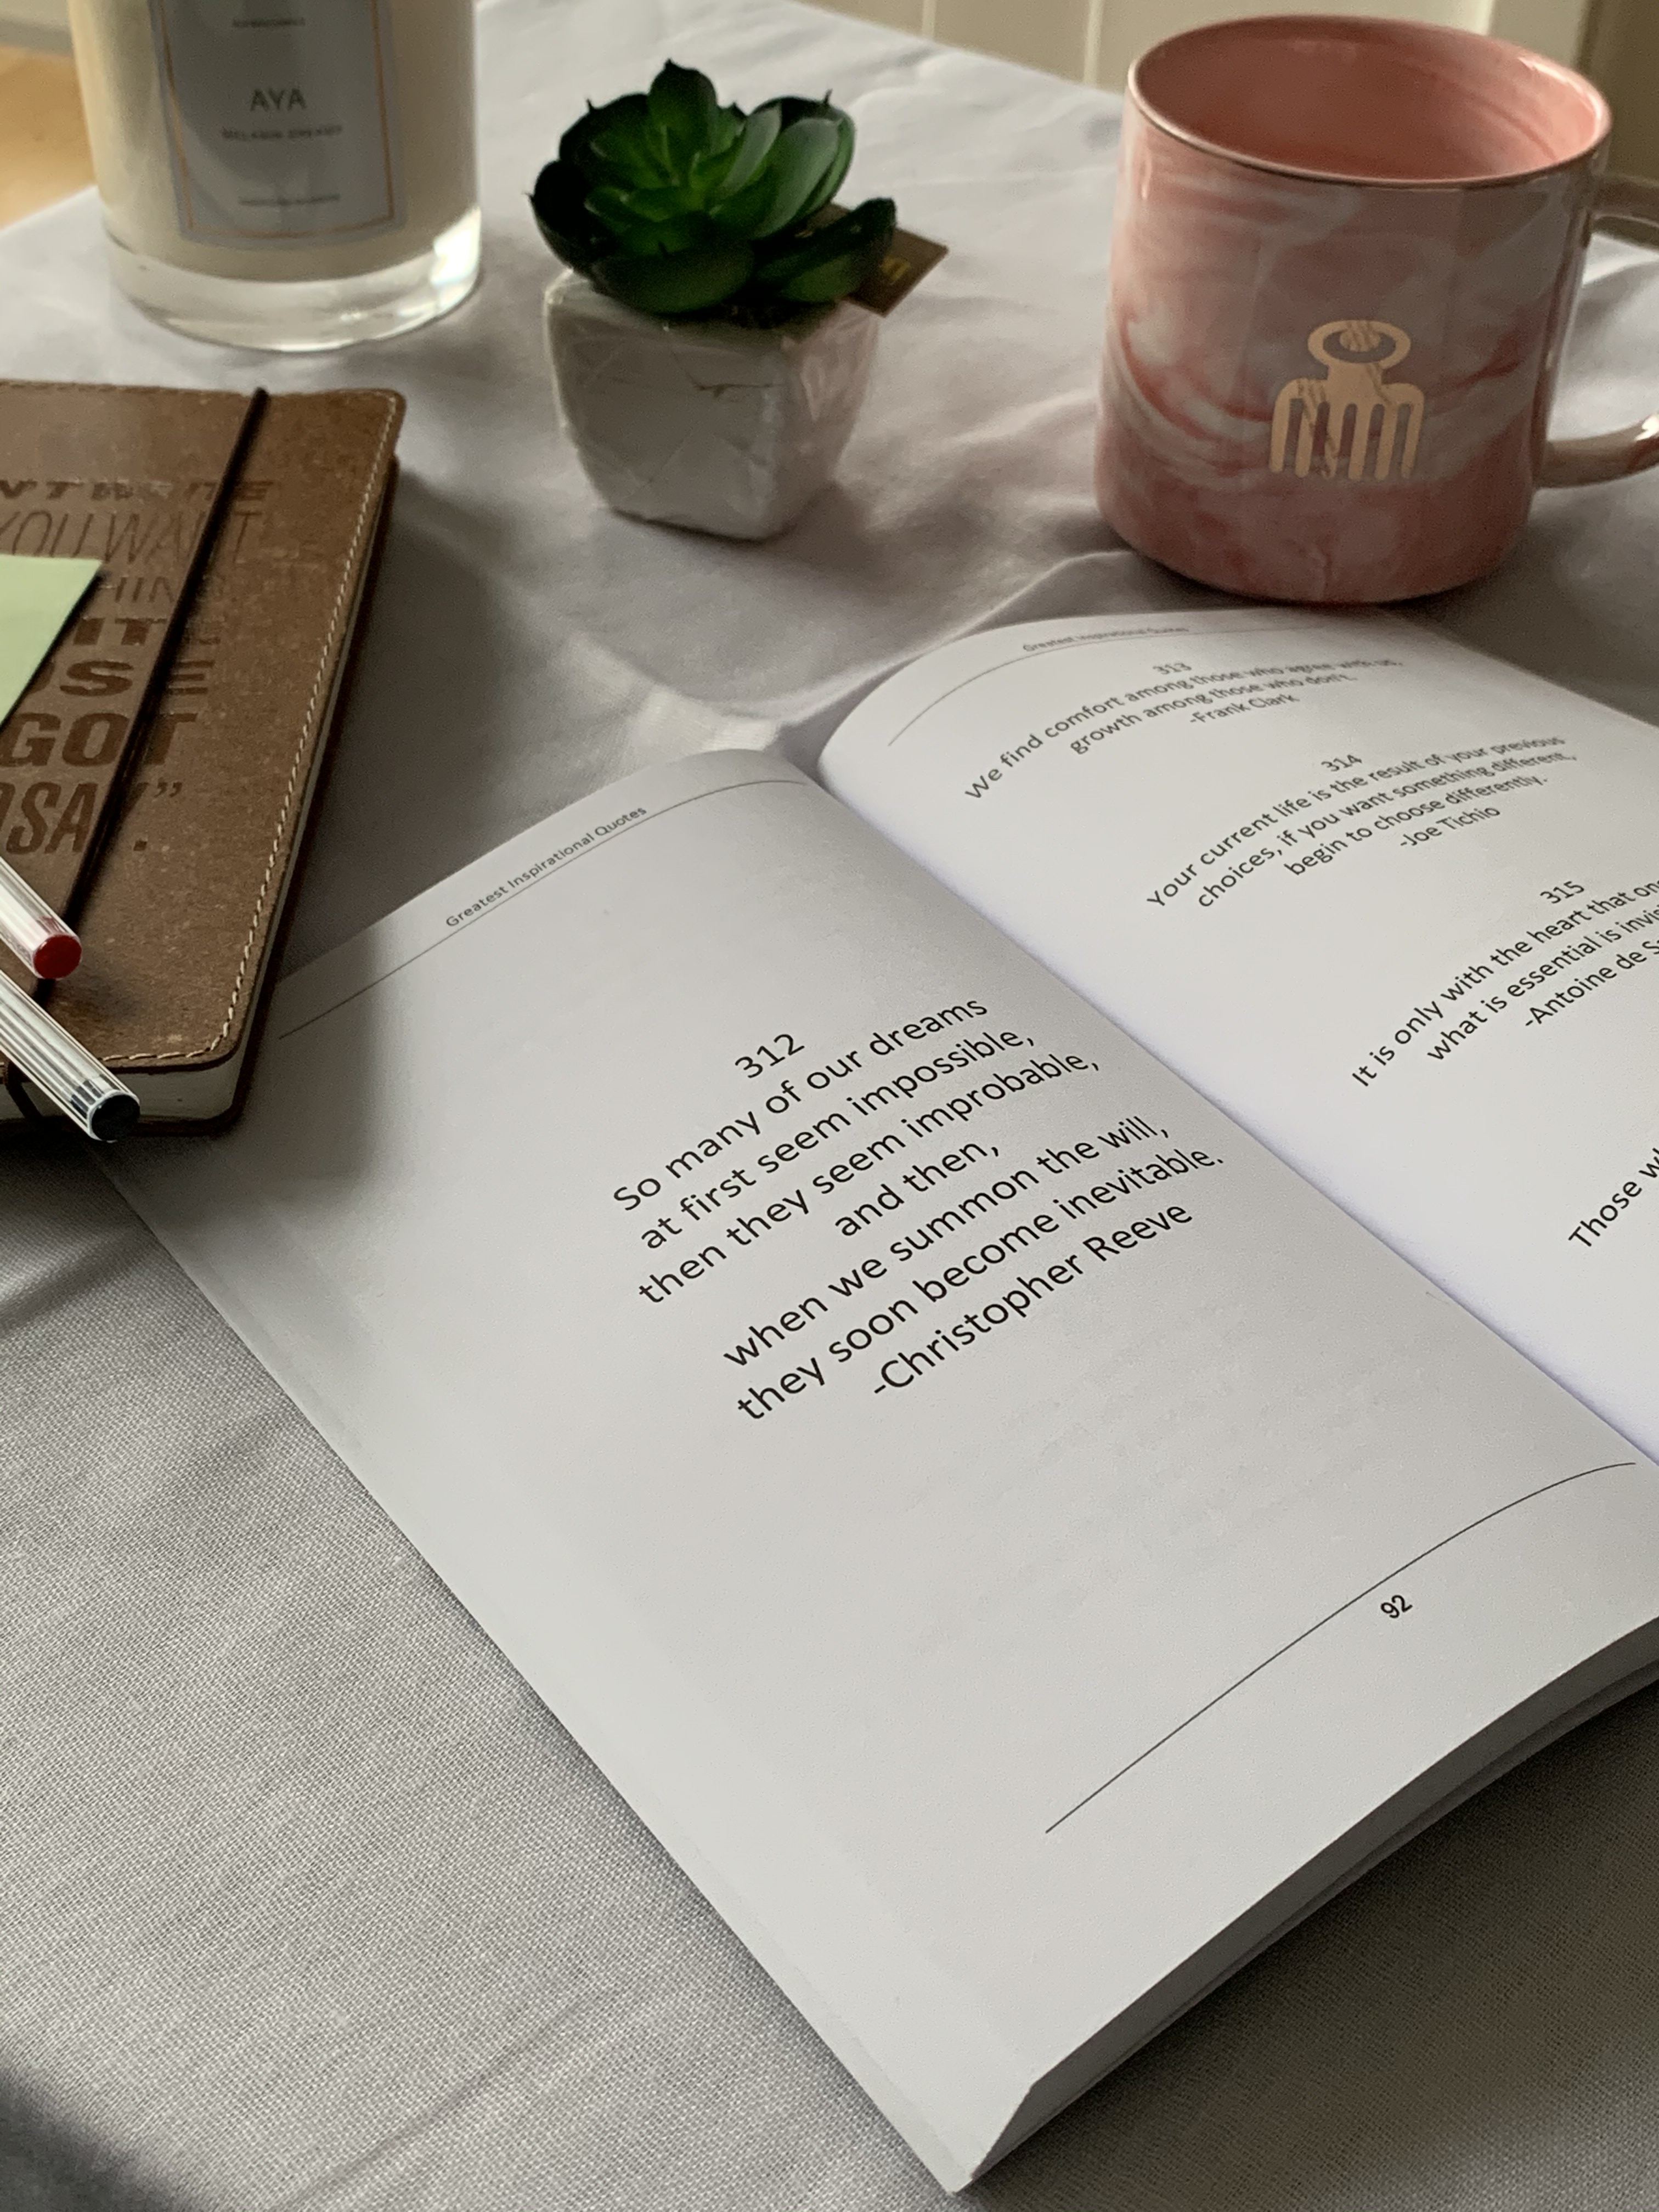 An open book with a quote with a mug, an artificial plant, and a candle in the background.